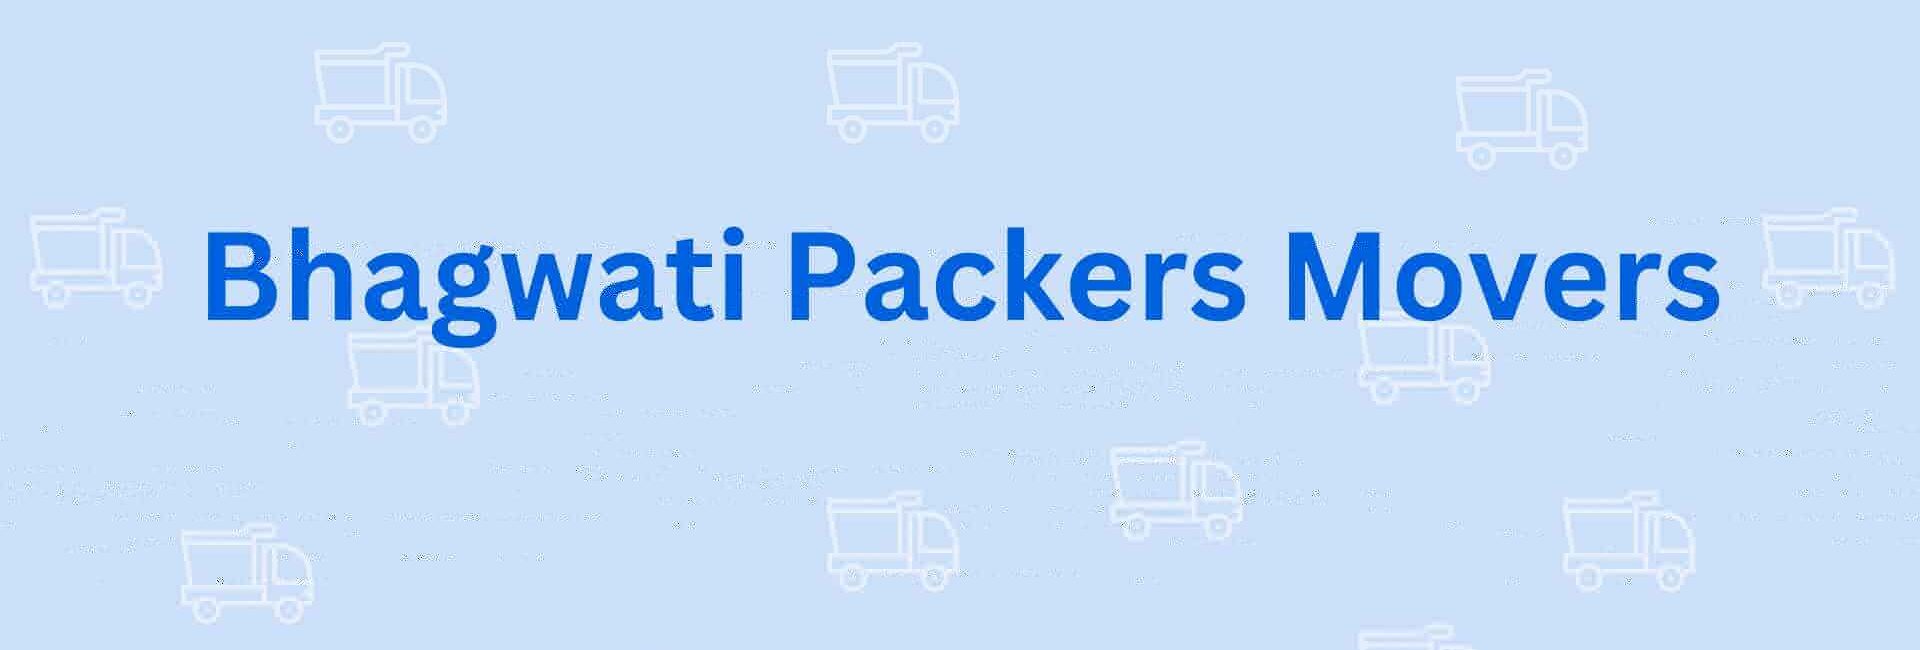 Bhagwati Packers Movers - Packers and Movers in Noida